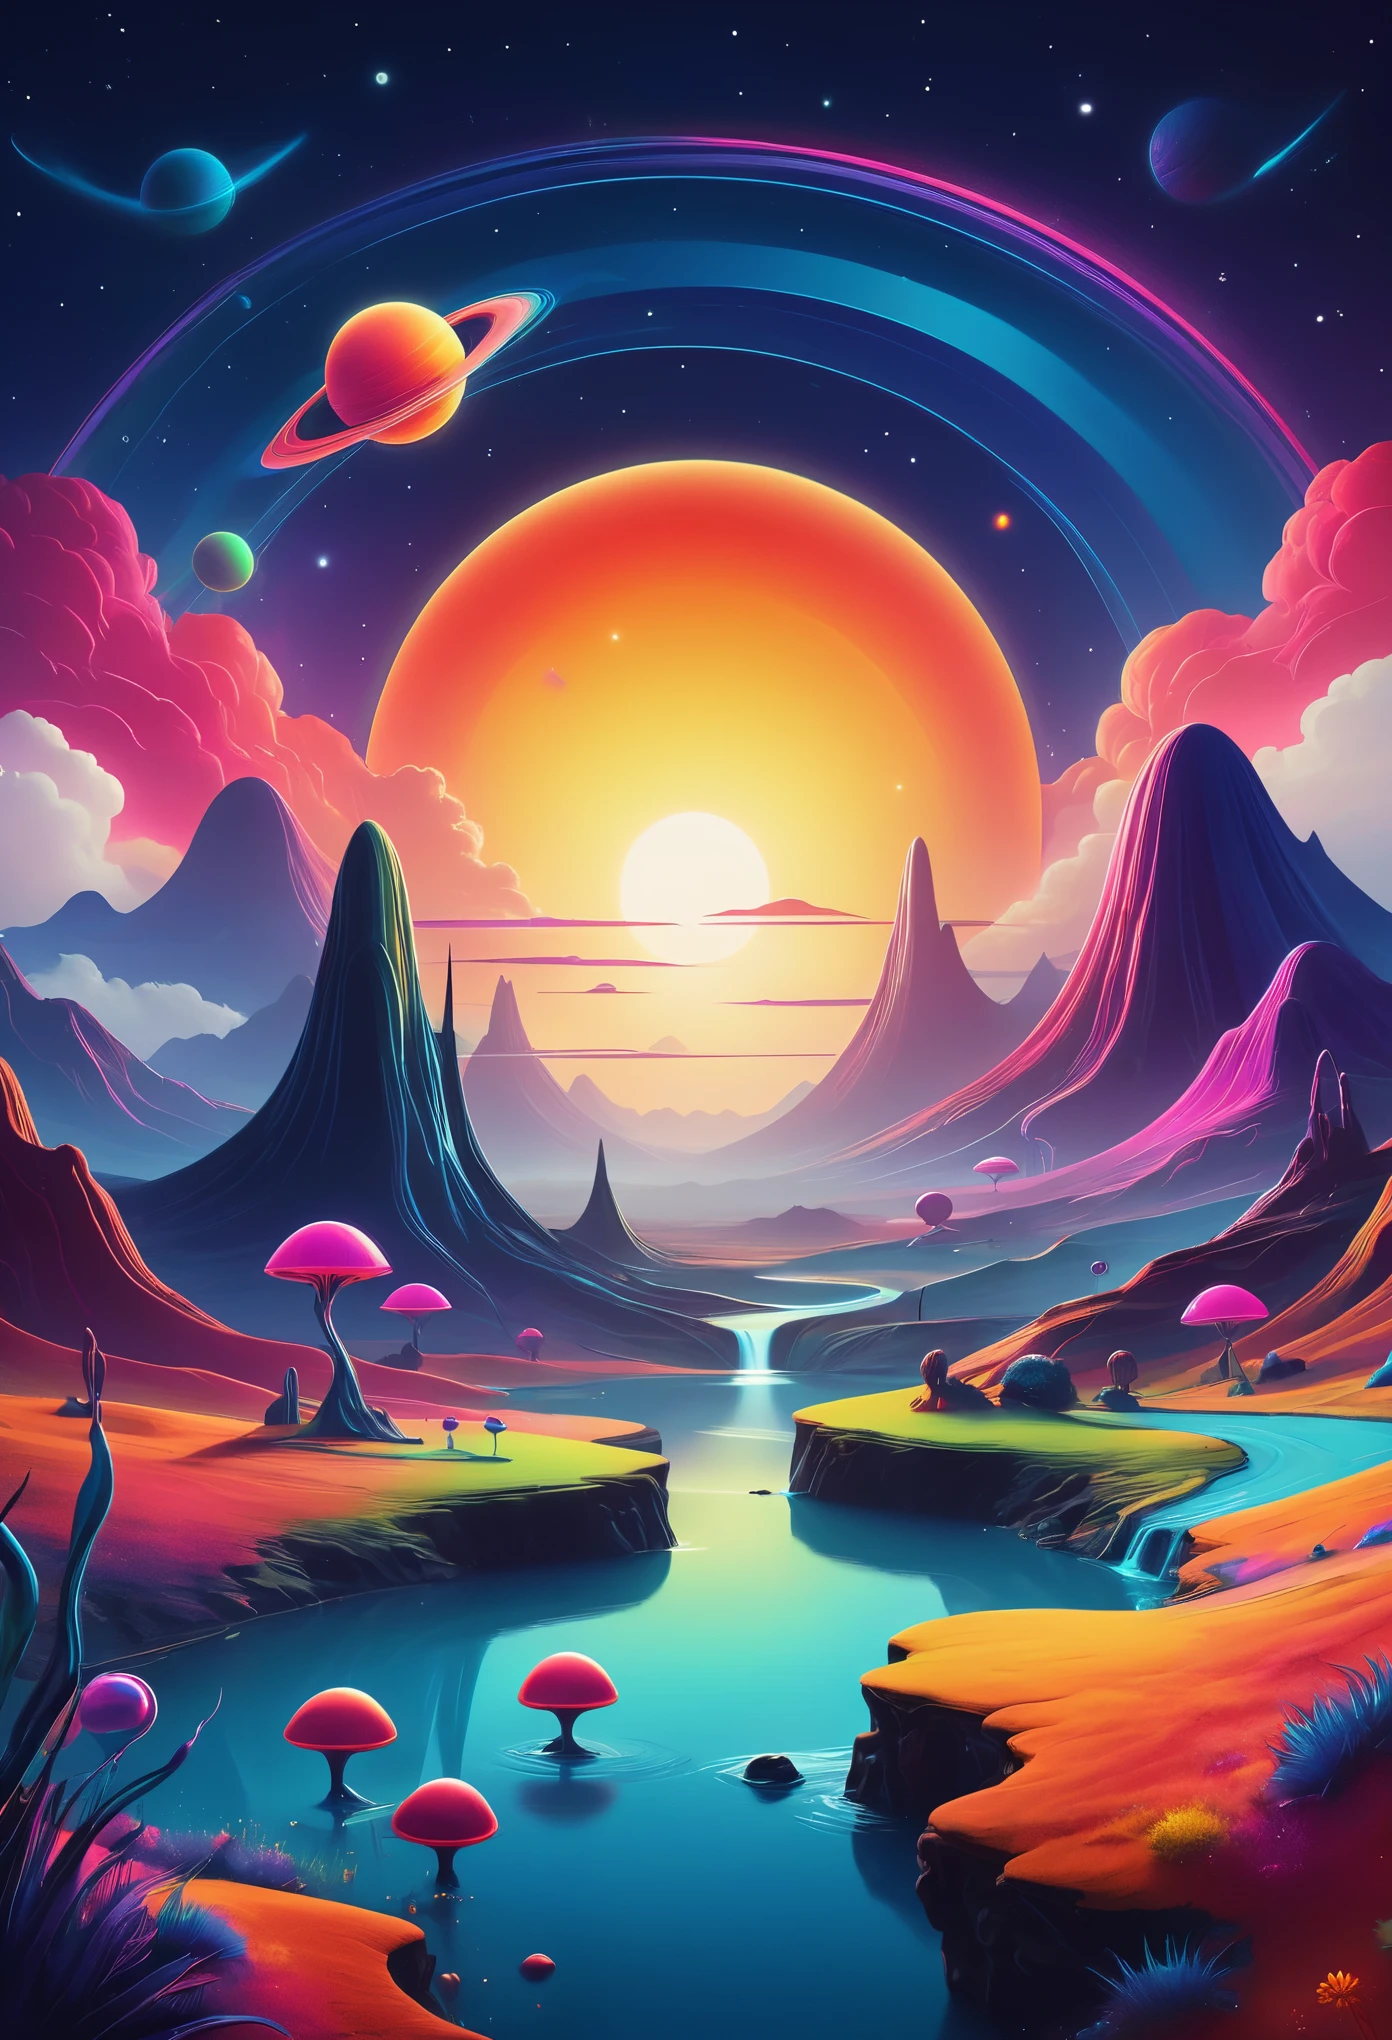 An alien landscape bursting with vibrant colors and whimsical features would captivate the imagination in a POP Illustration. The scene would depict a cute alien creature, with round, expressive eyes, playfully exploring the pleasantly strange terrain. The landscape would be adorned with thick lines, adding depth and dimension to the rich colors, which pop against the backdrop of the cosmically inspired setting. The overall effect would be a contemporary art masterpiece, filled with joy and wonder, inviting the viewer to explore the infinite possibilities of this fascinating world. (lg), (masterpiece), contemporary art, colorful illustration, thick lines, rich colors, alien landscape, pop art, cute alien,